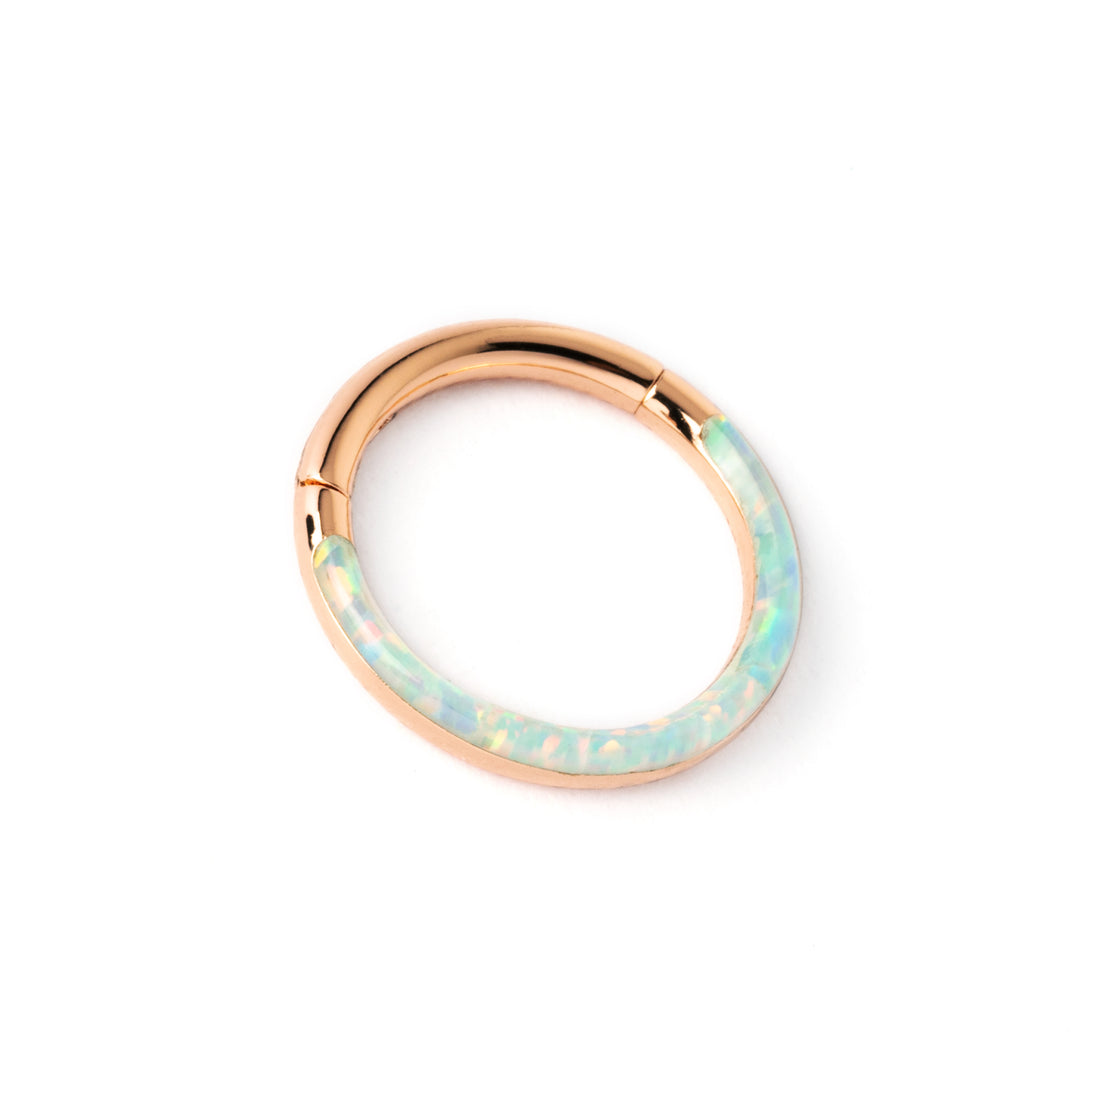 Rose Gold surgical steel septum clicker ring with white opal inlay right side view